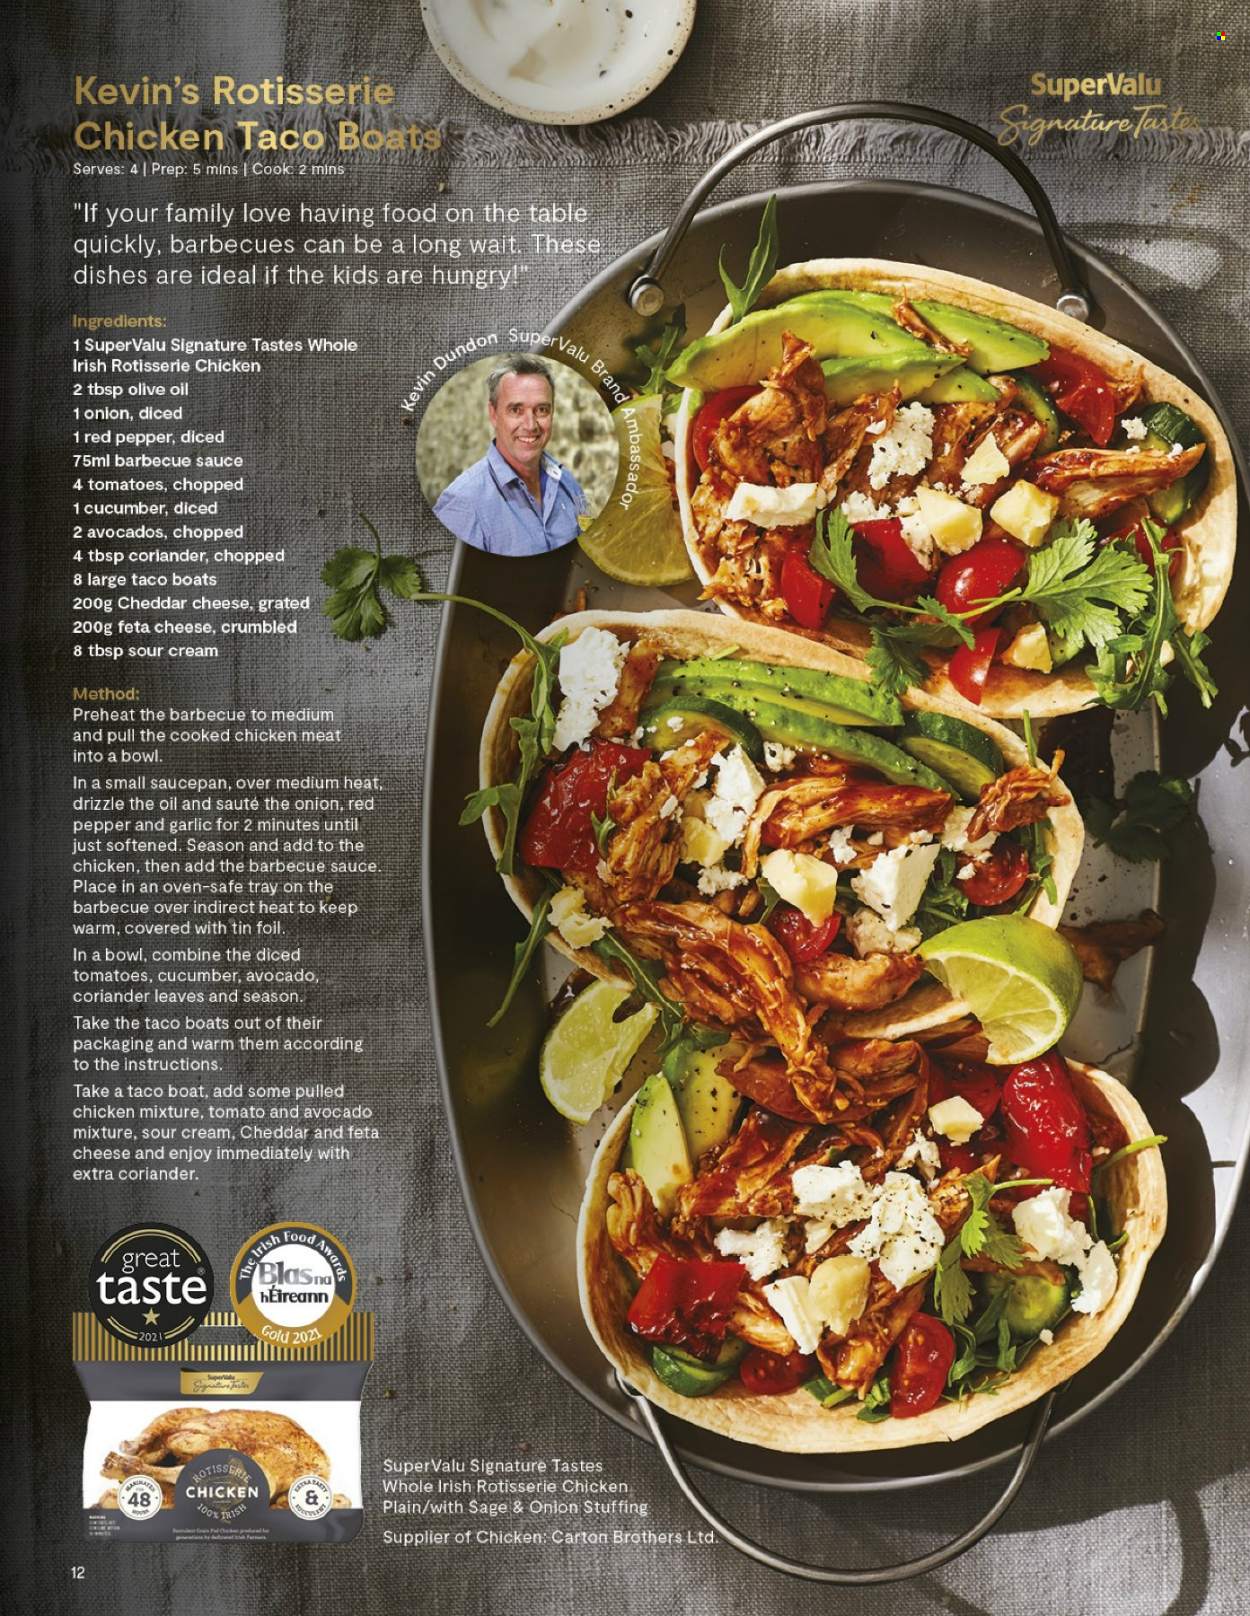 thumbnail - SuperValu offer  - Sales products - garlic, chicken roast, pulled chicken, cheddar, cheese, feta, sour cream, diced tomatoes, coriander, BBQ sauce, BROTHERS. Page 12.